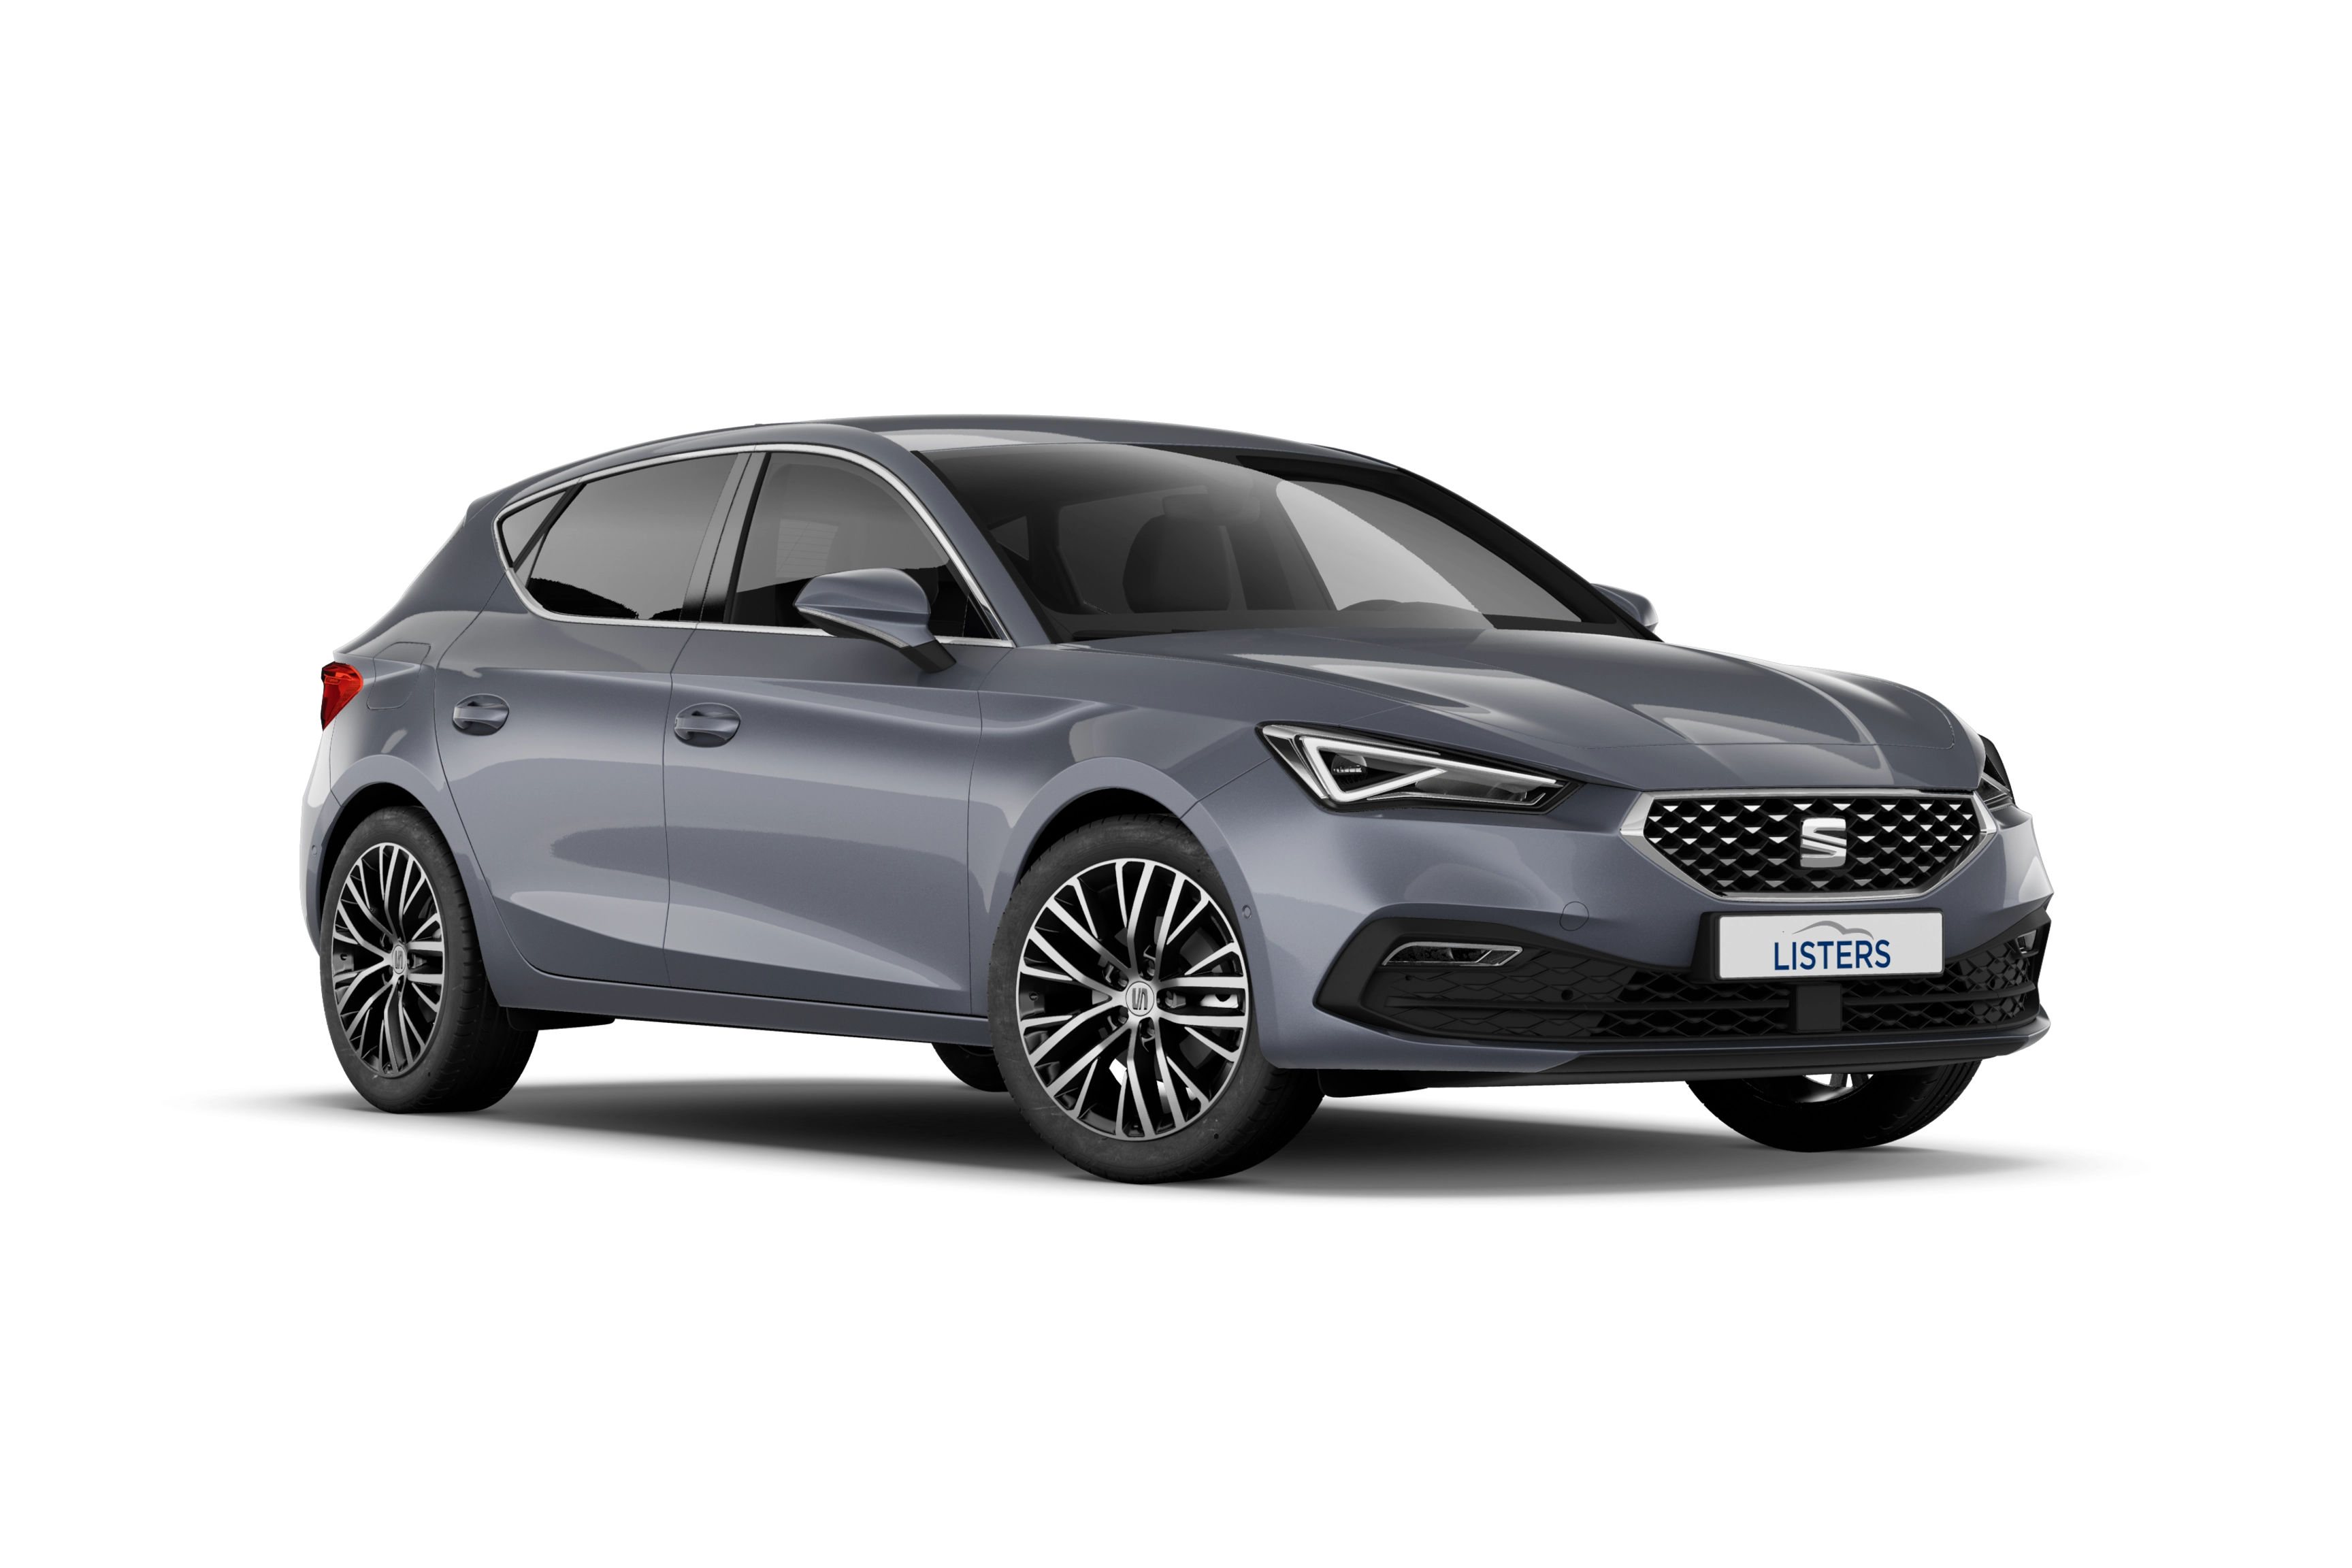 SEAT Leon Contract Hire & Leasing Offers